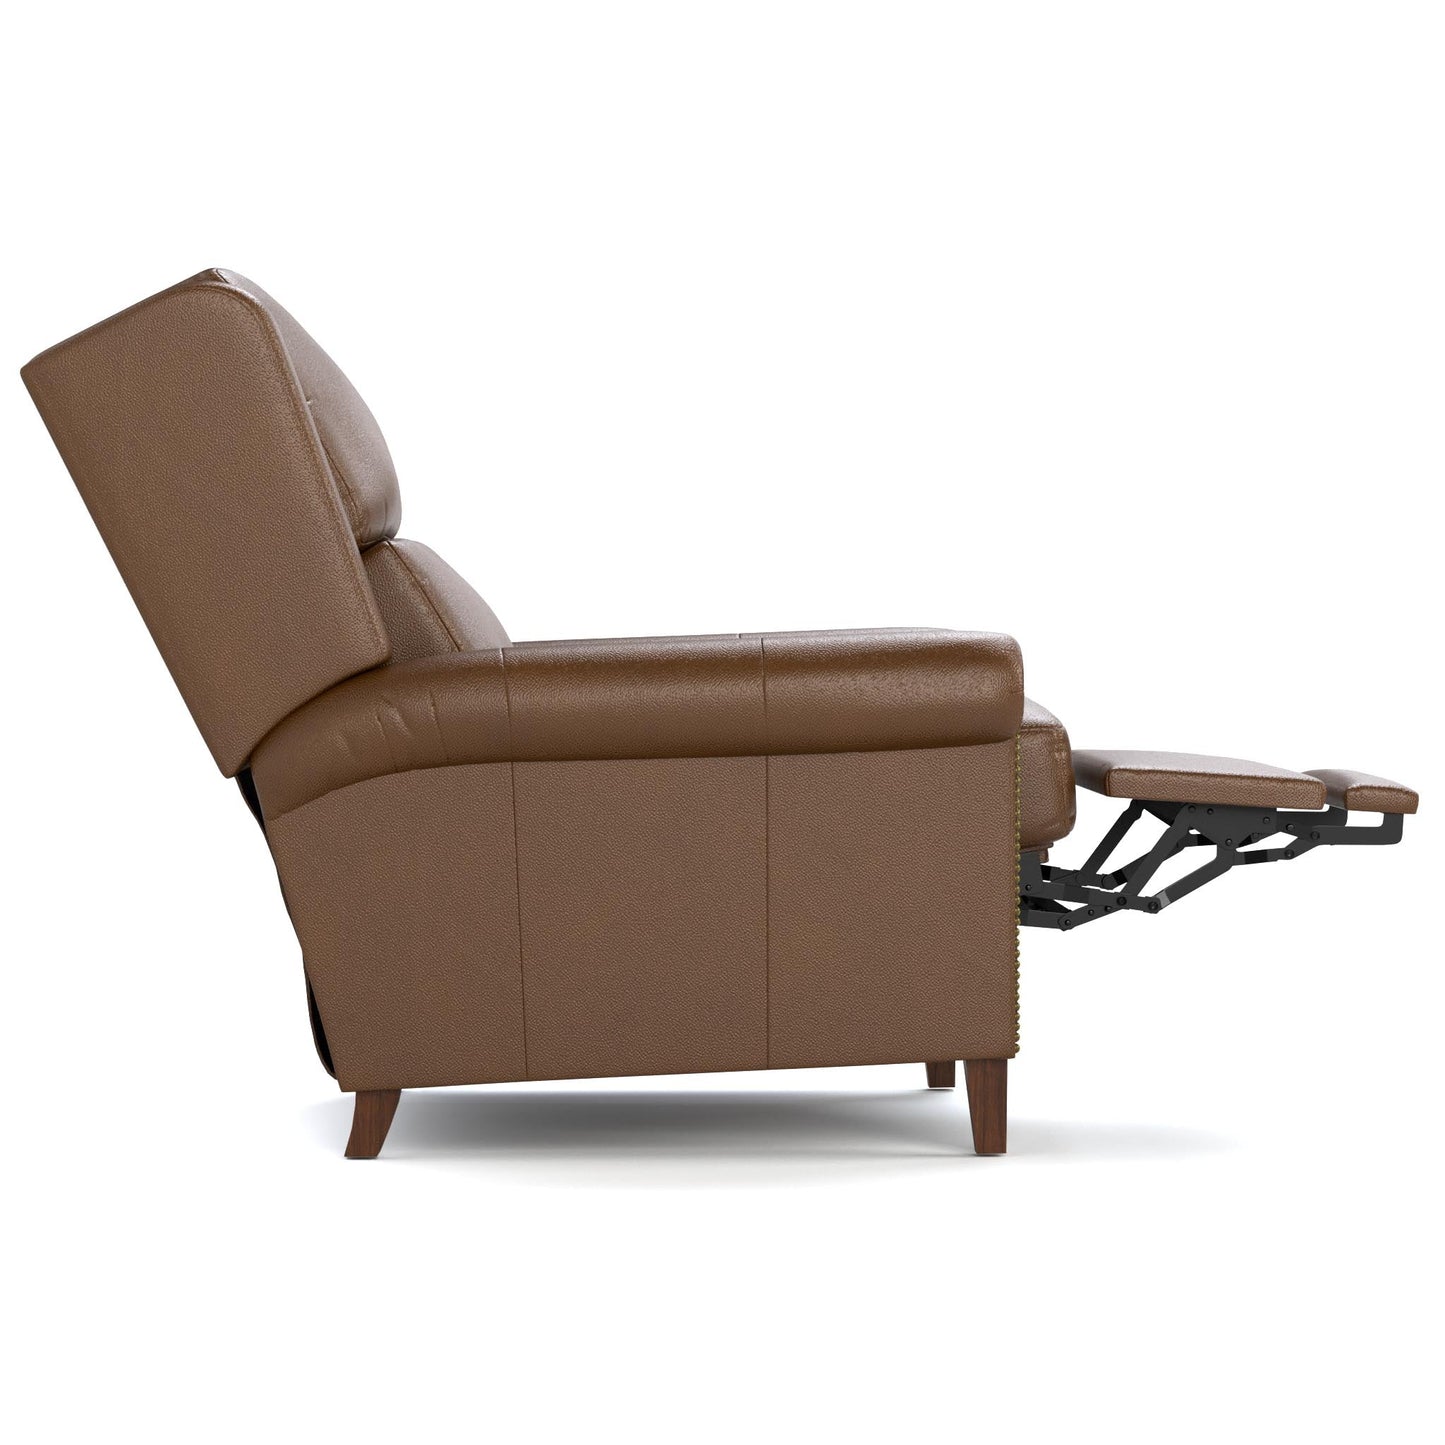 Woodlands Small Roll Arm Manual Recliner with Nails Selvano Bark - Side Reclined